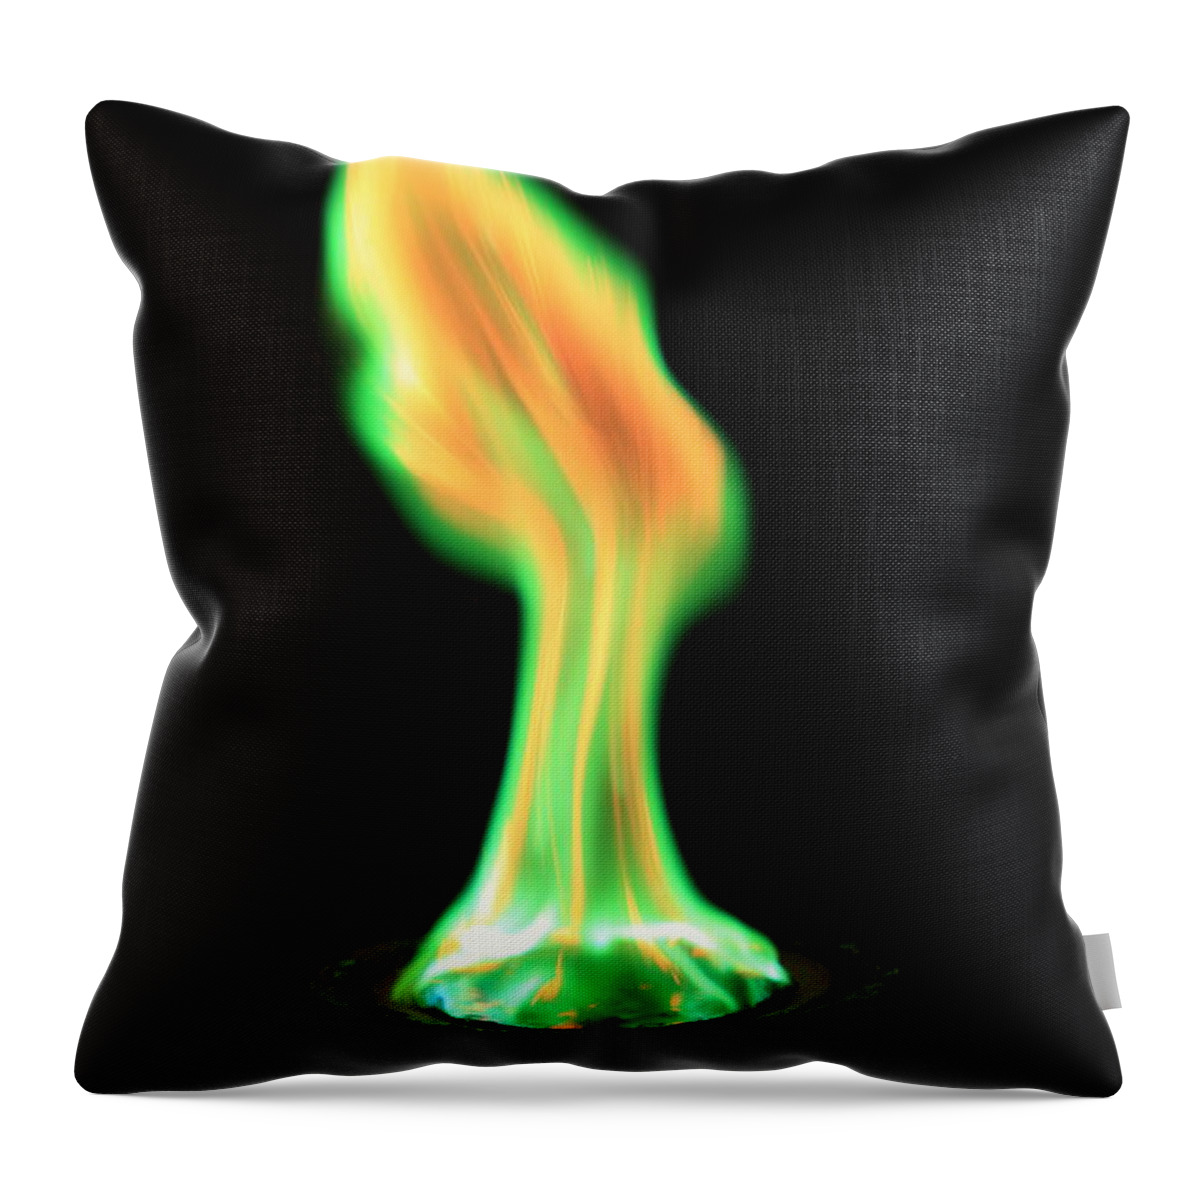 Copper(ii) Chloride Throw Pillow featuring the photograph Copperii Chloride Flame Test #1 by Ted Kinsman